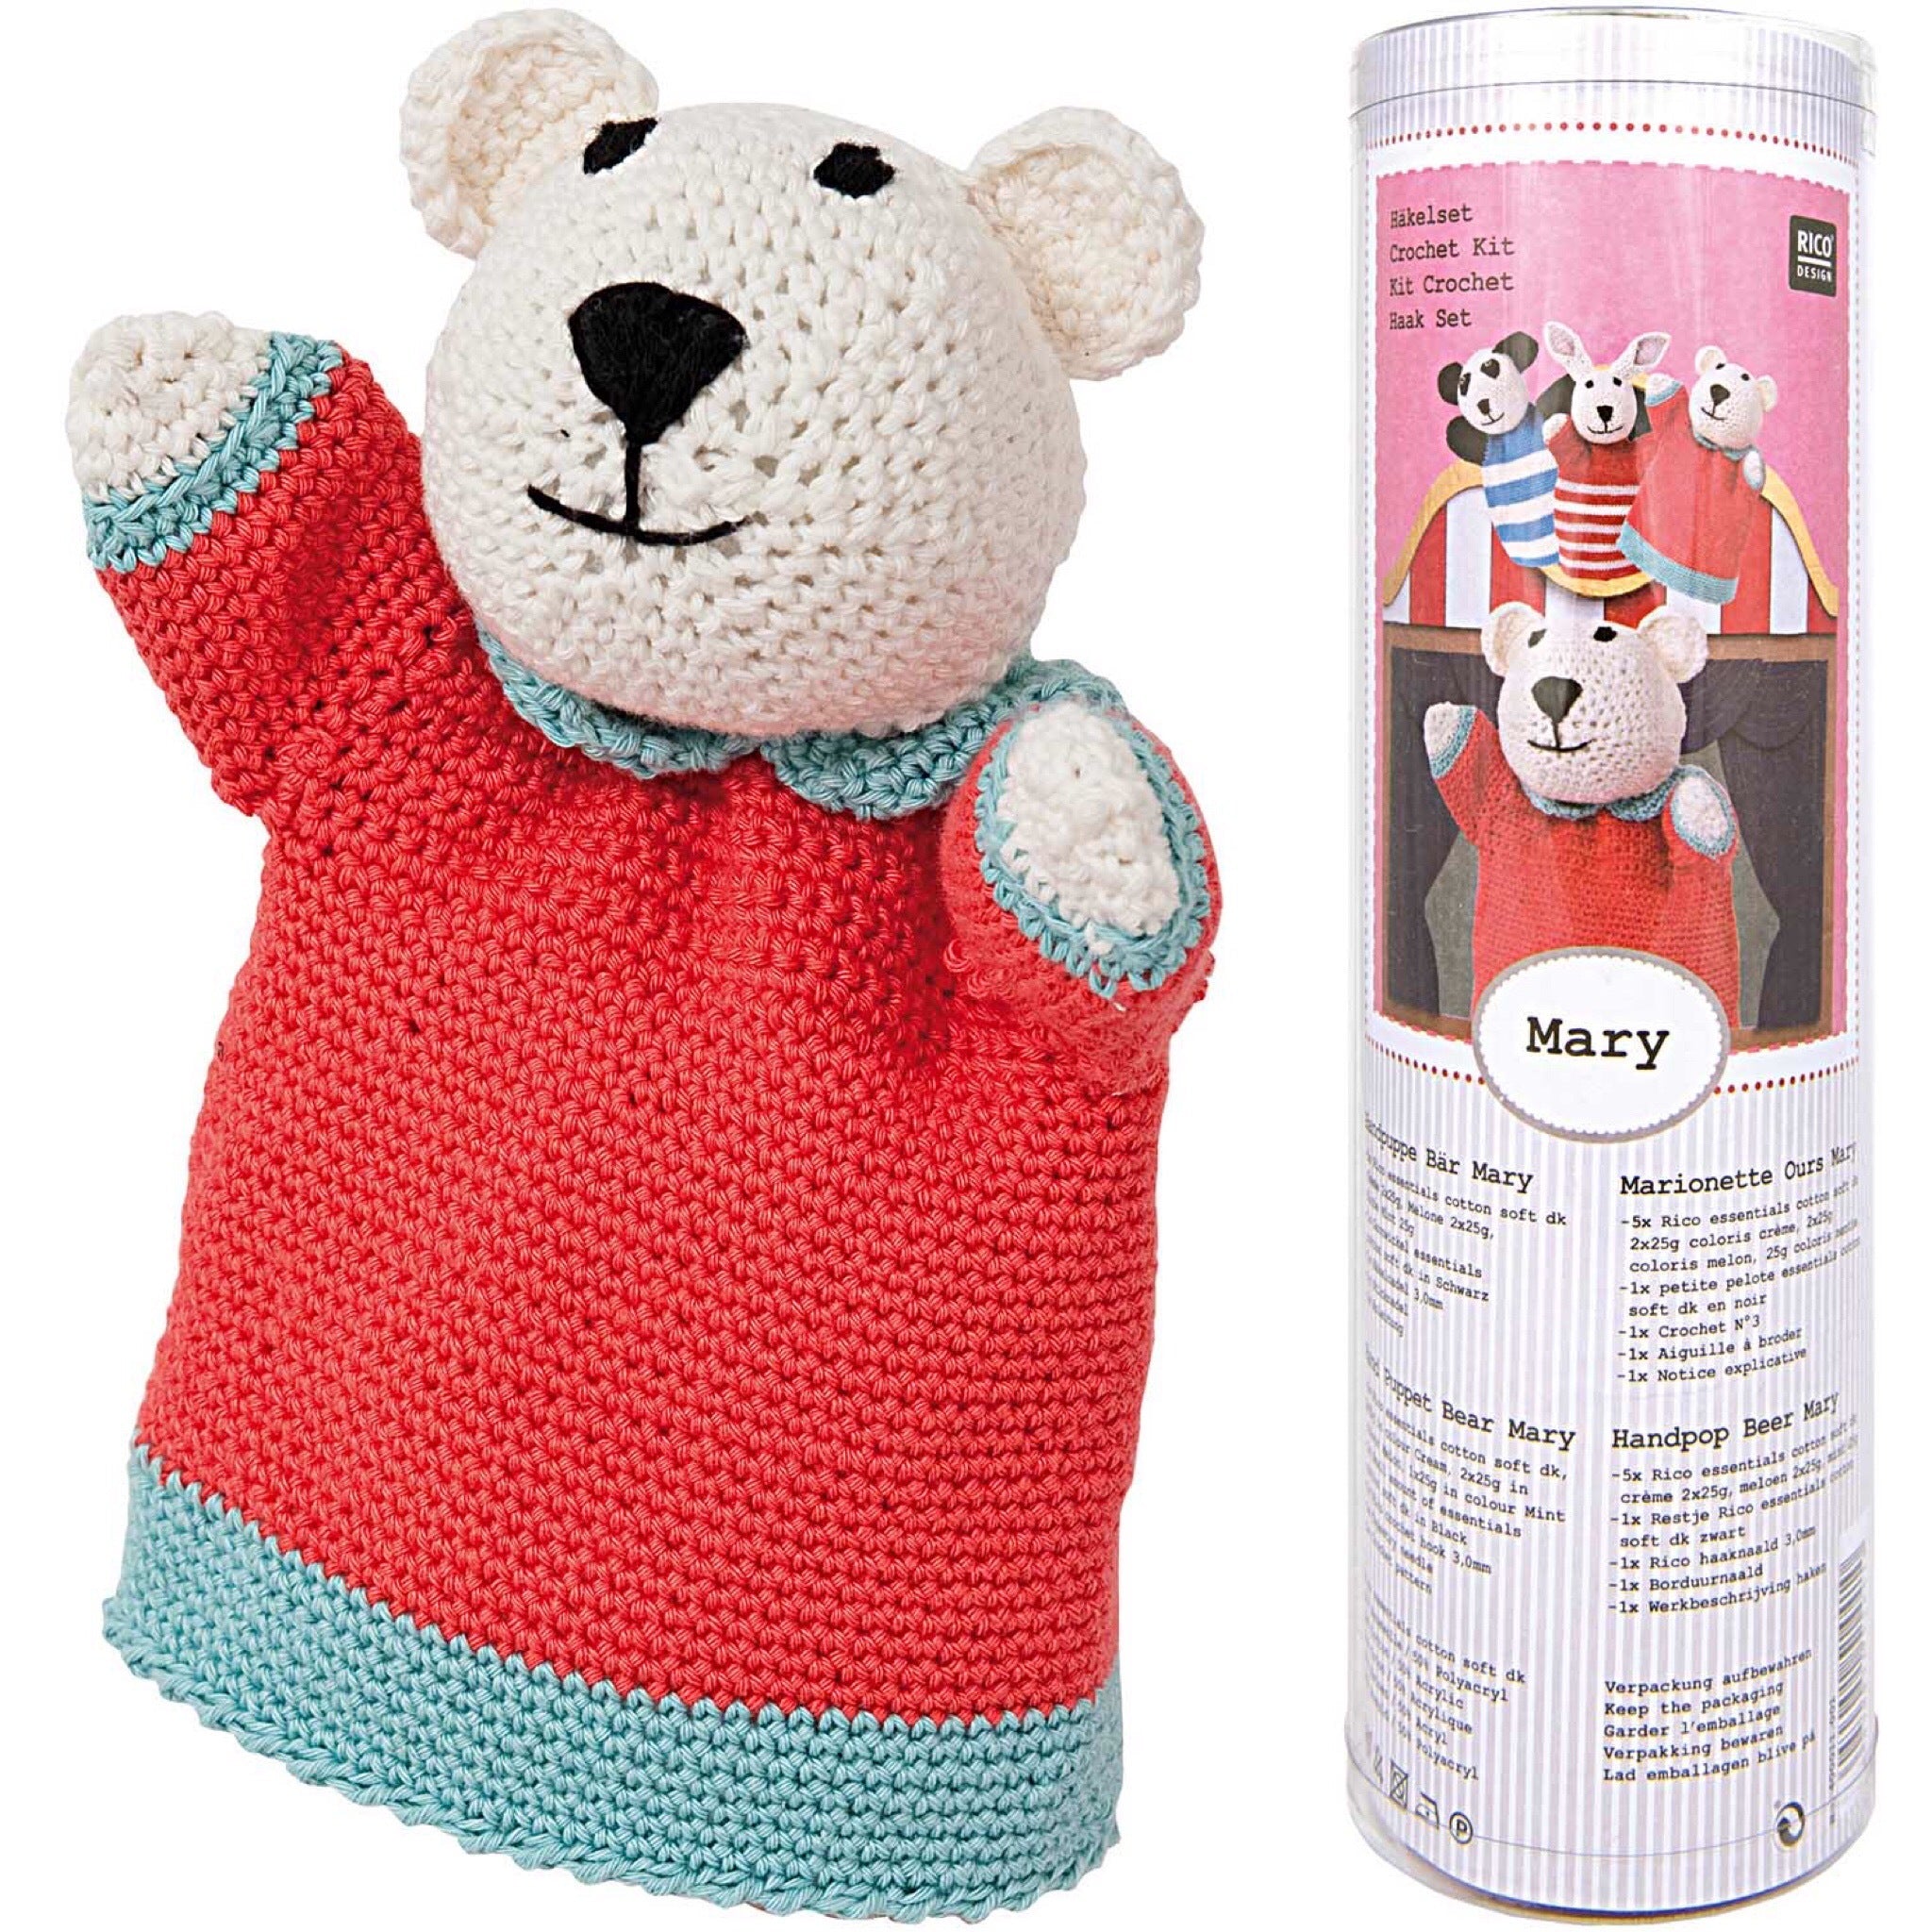 Mary crochet teddy hand puppet by Rico